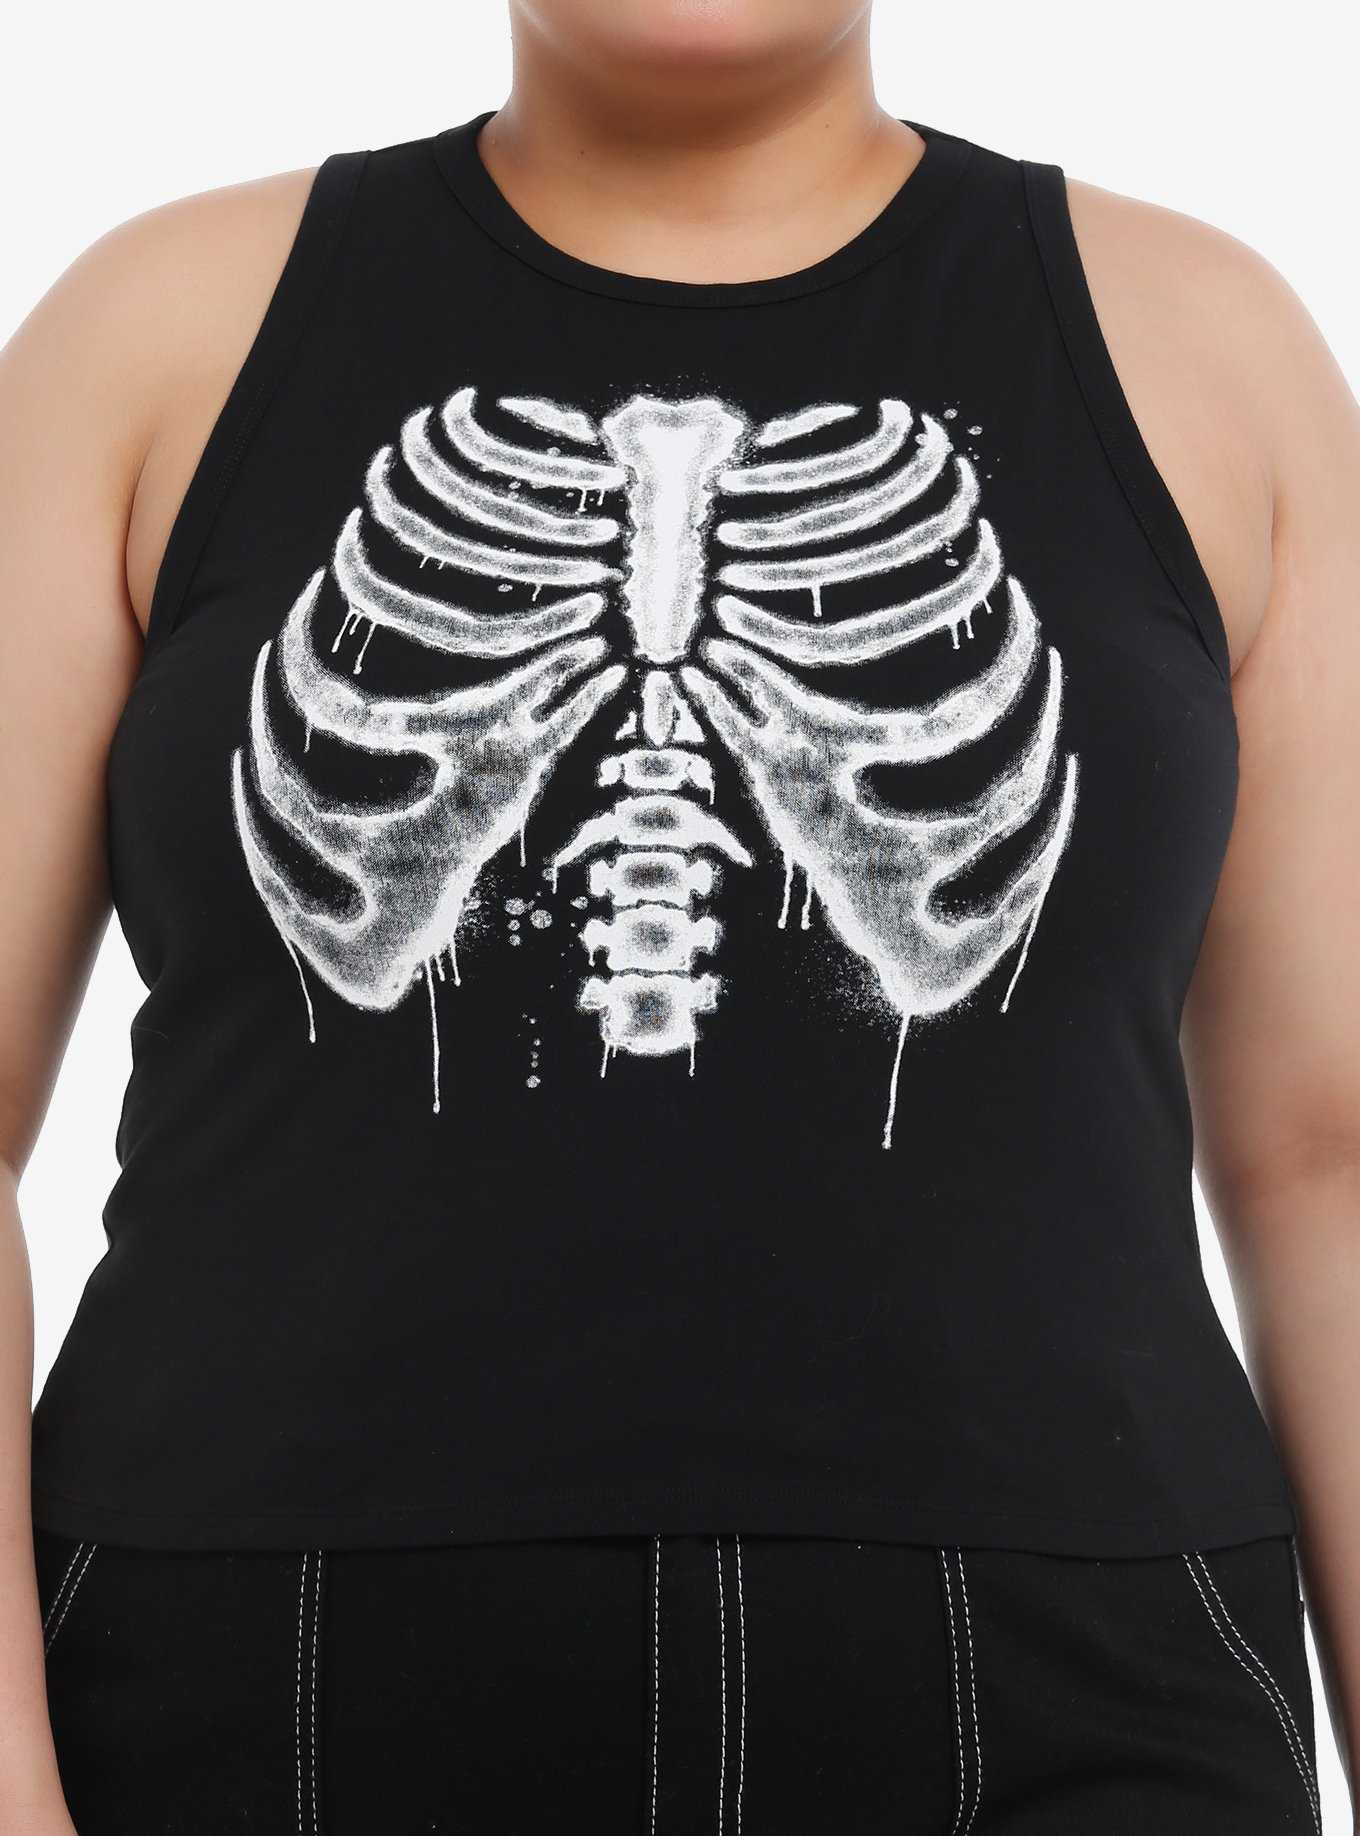 Social Collision Drippy Rib Cage Girls Muscle Tank Top Plus Size, , hi-res